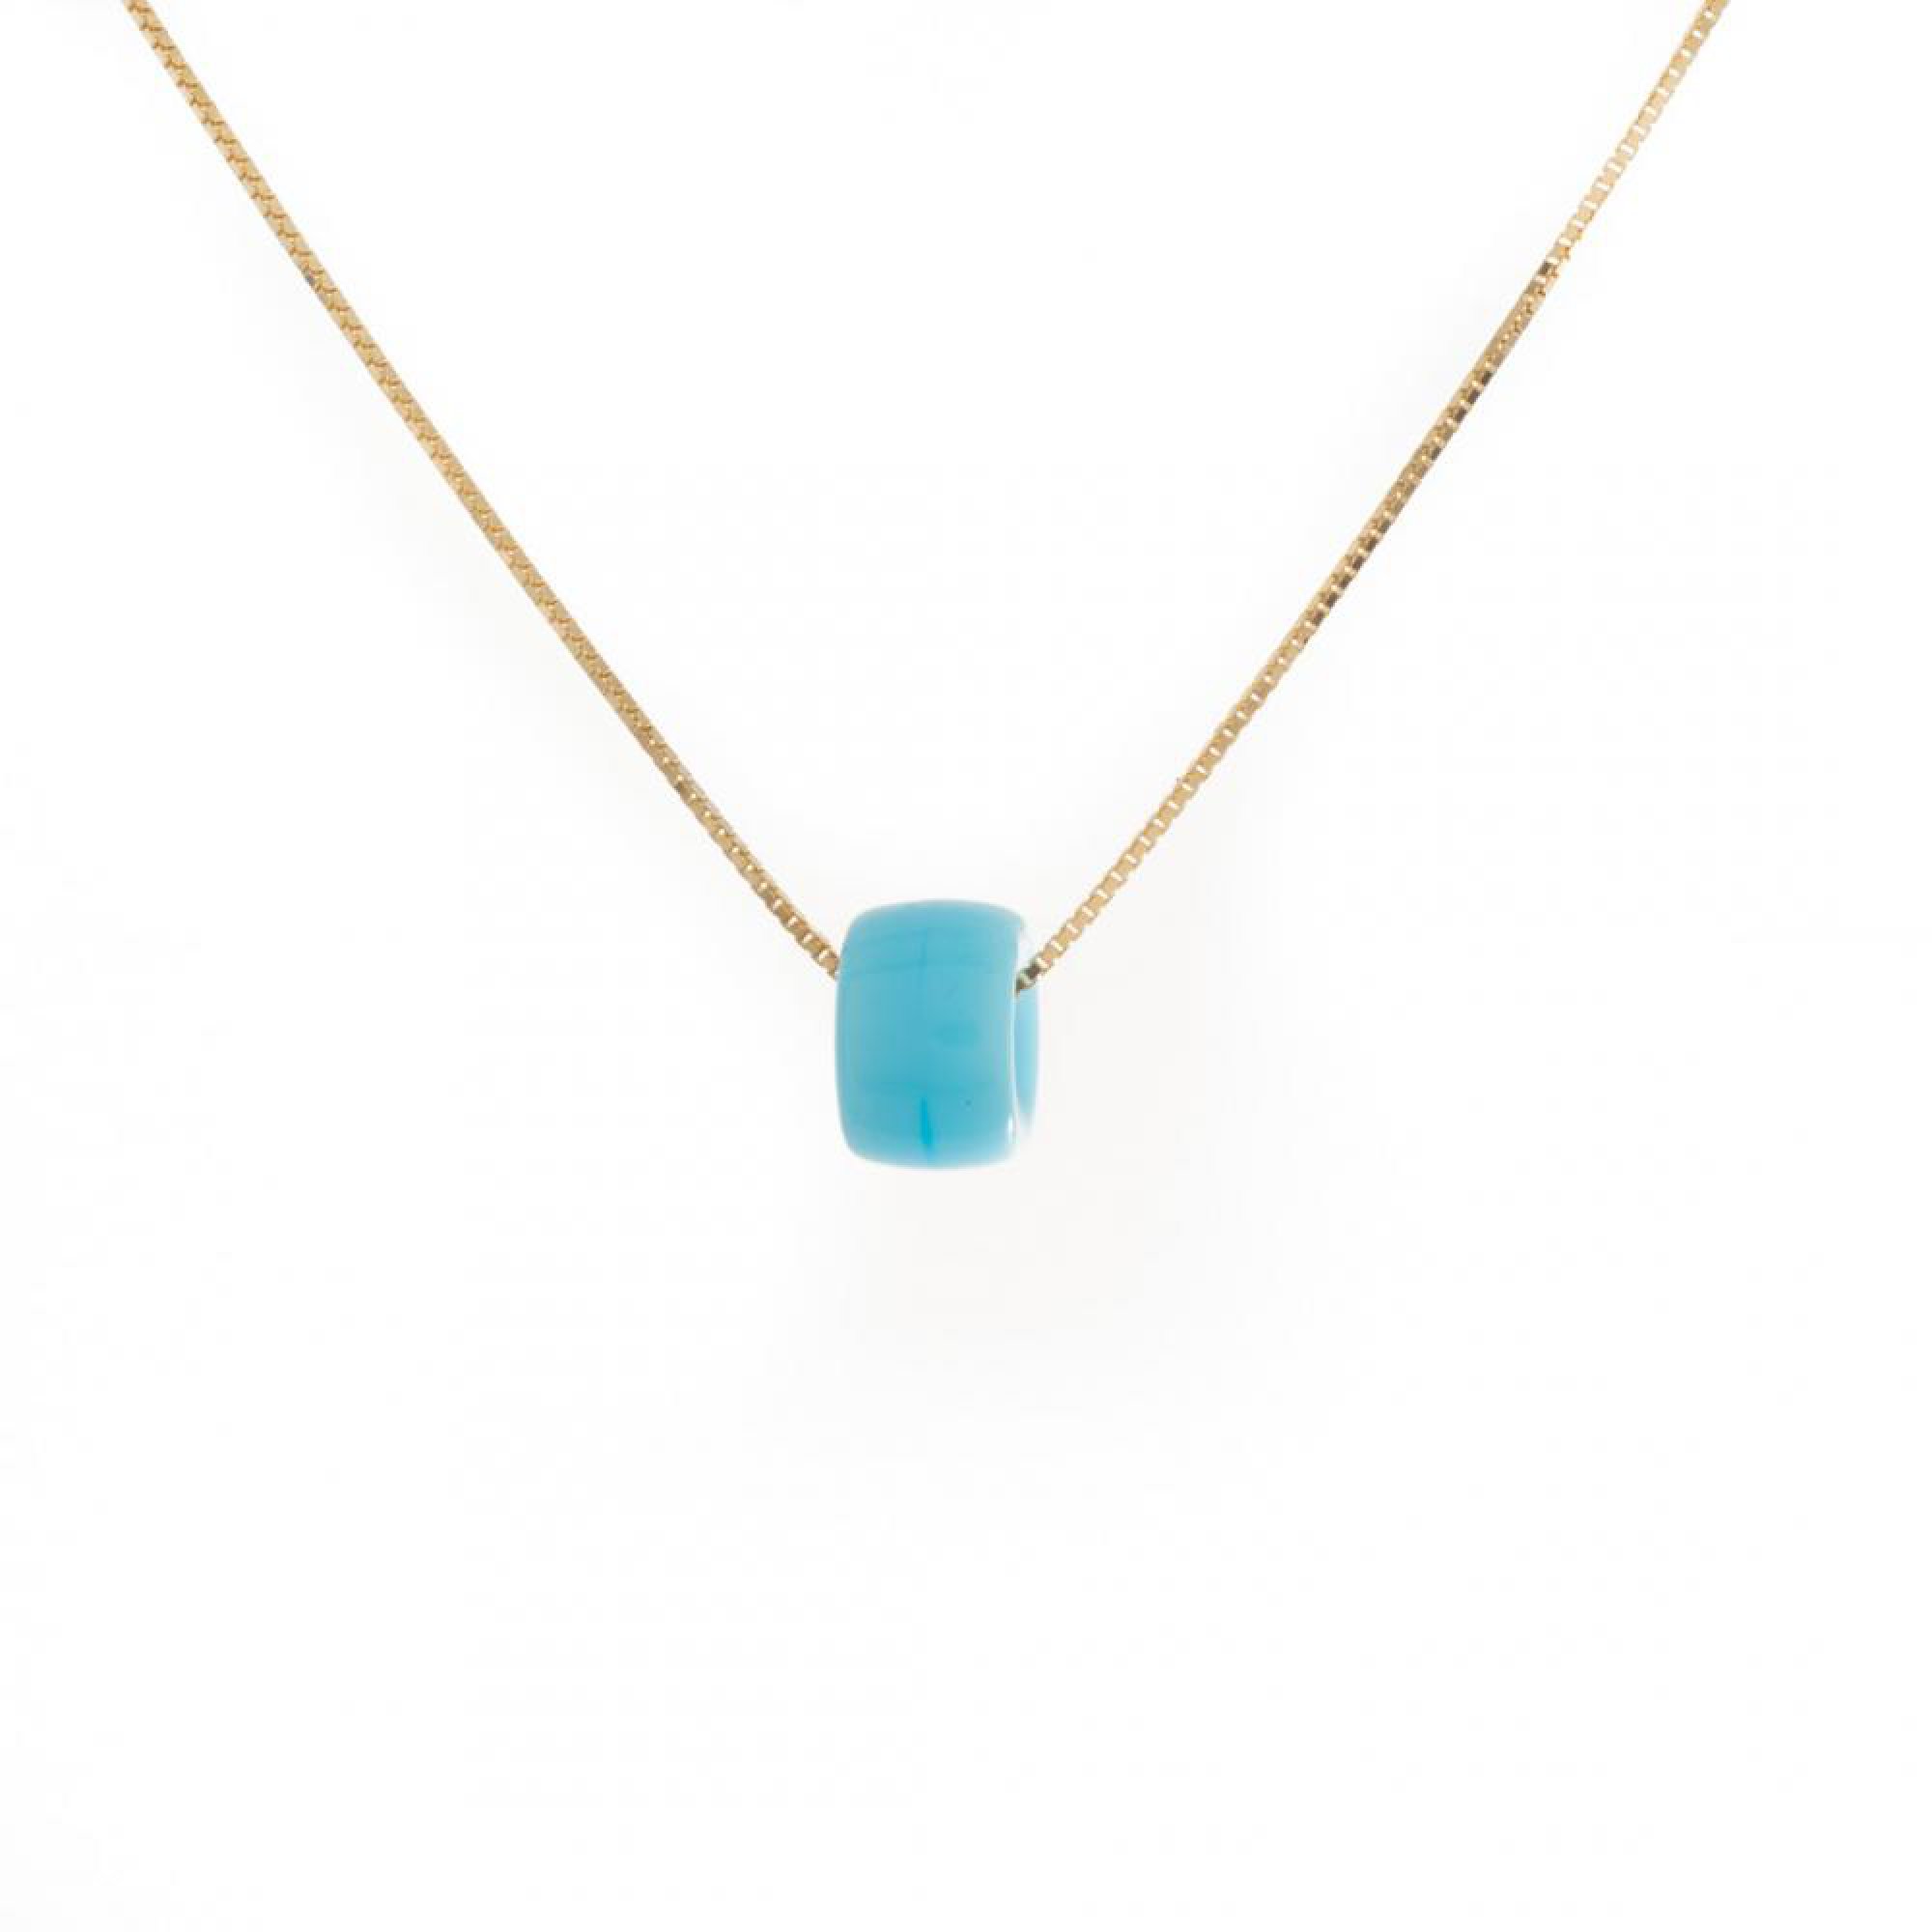 Gold plated blue bead necklace